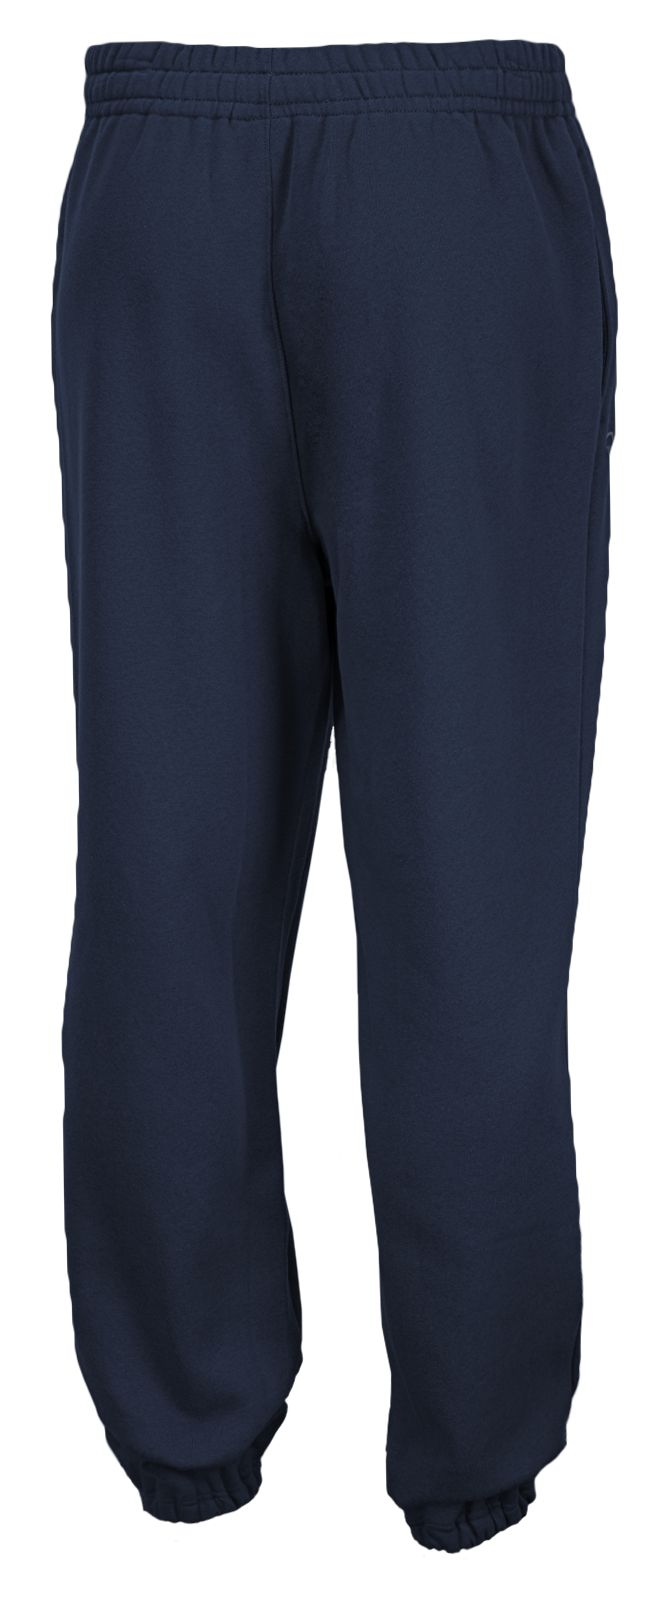 Core Team Pant, Navy image number 0